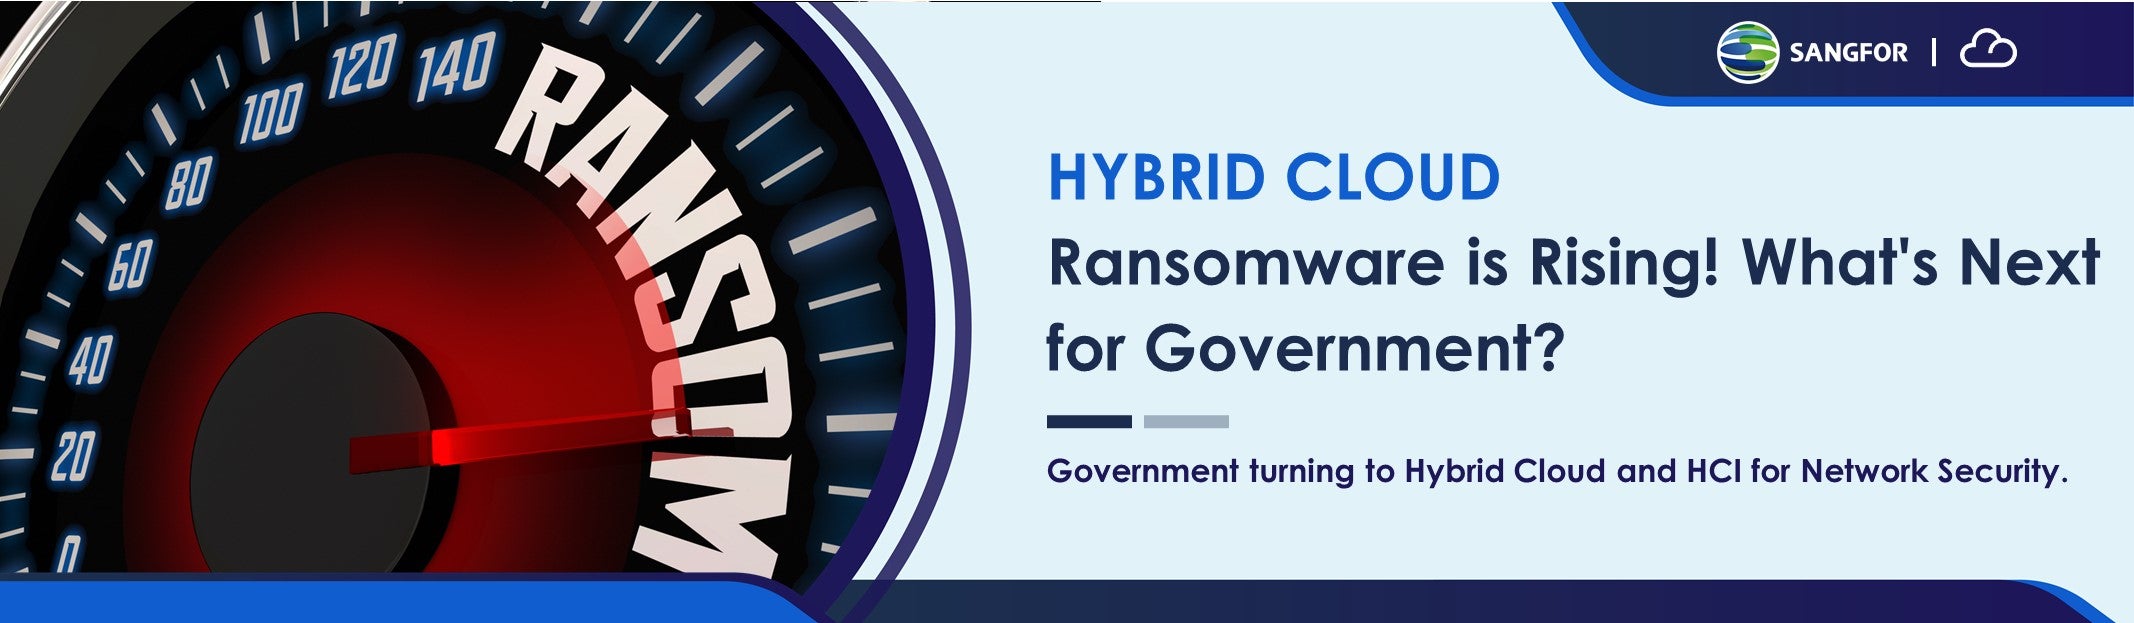 hybrid cloud ransomware is rising article